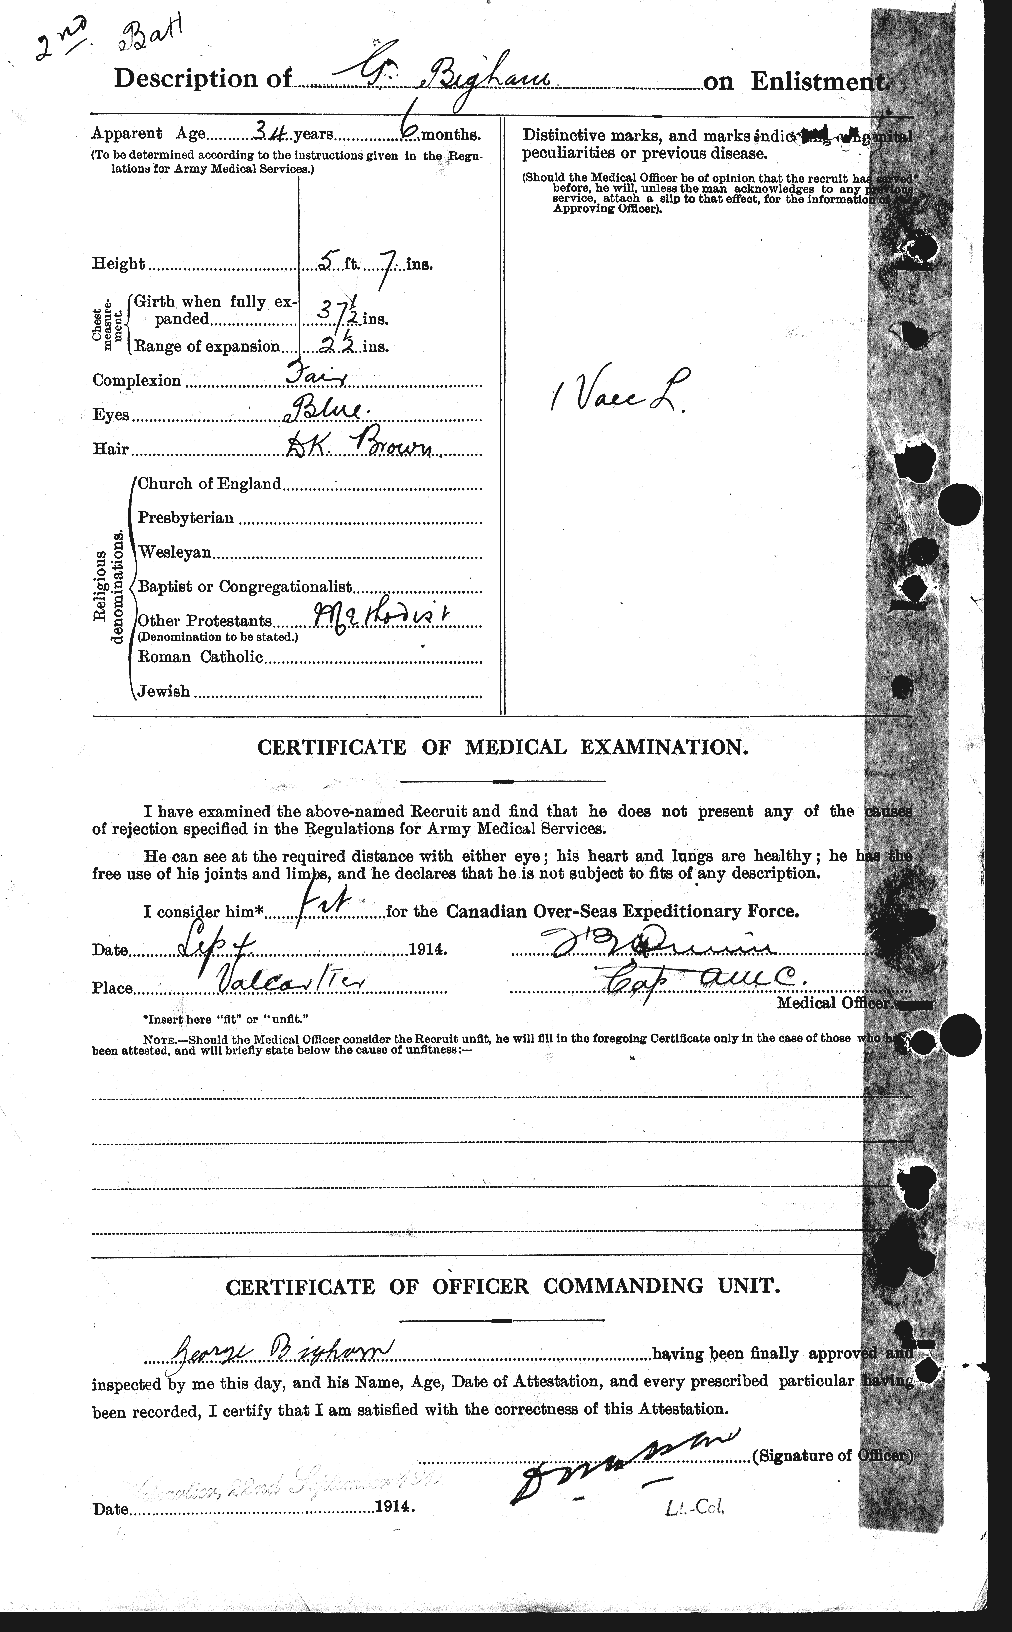 Personnel Records of the First World War - CEF 239141b